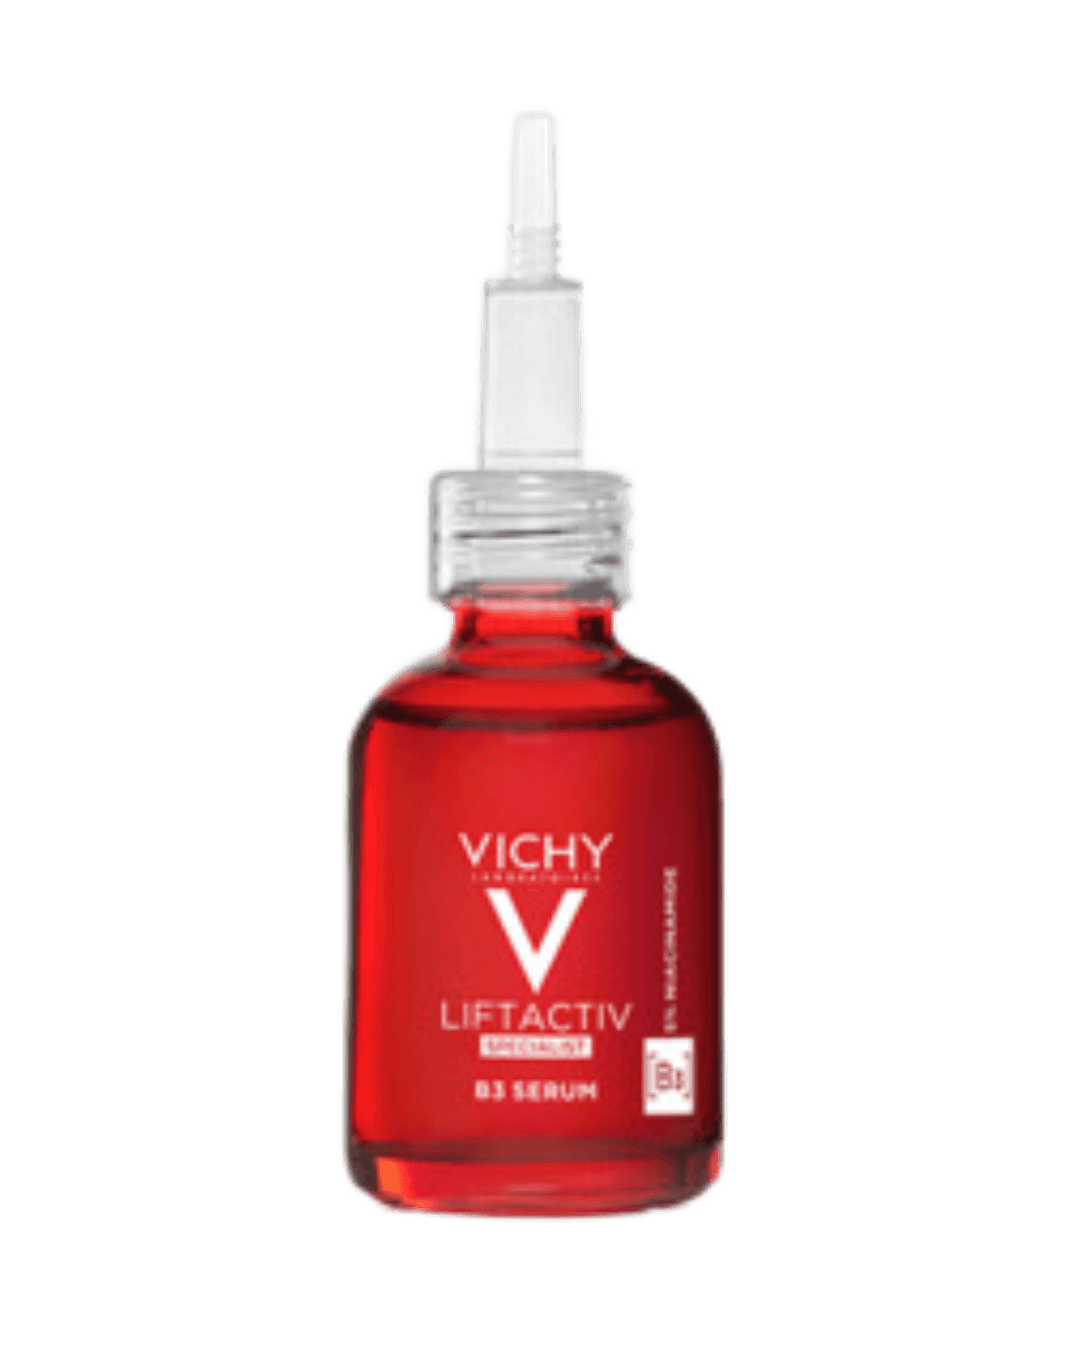 Daily Vanity Beauty Awards 2024 Best Skincare Vichy Liftactiv B3 Serum Voted By Beauty Experts